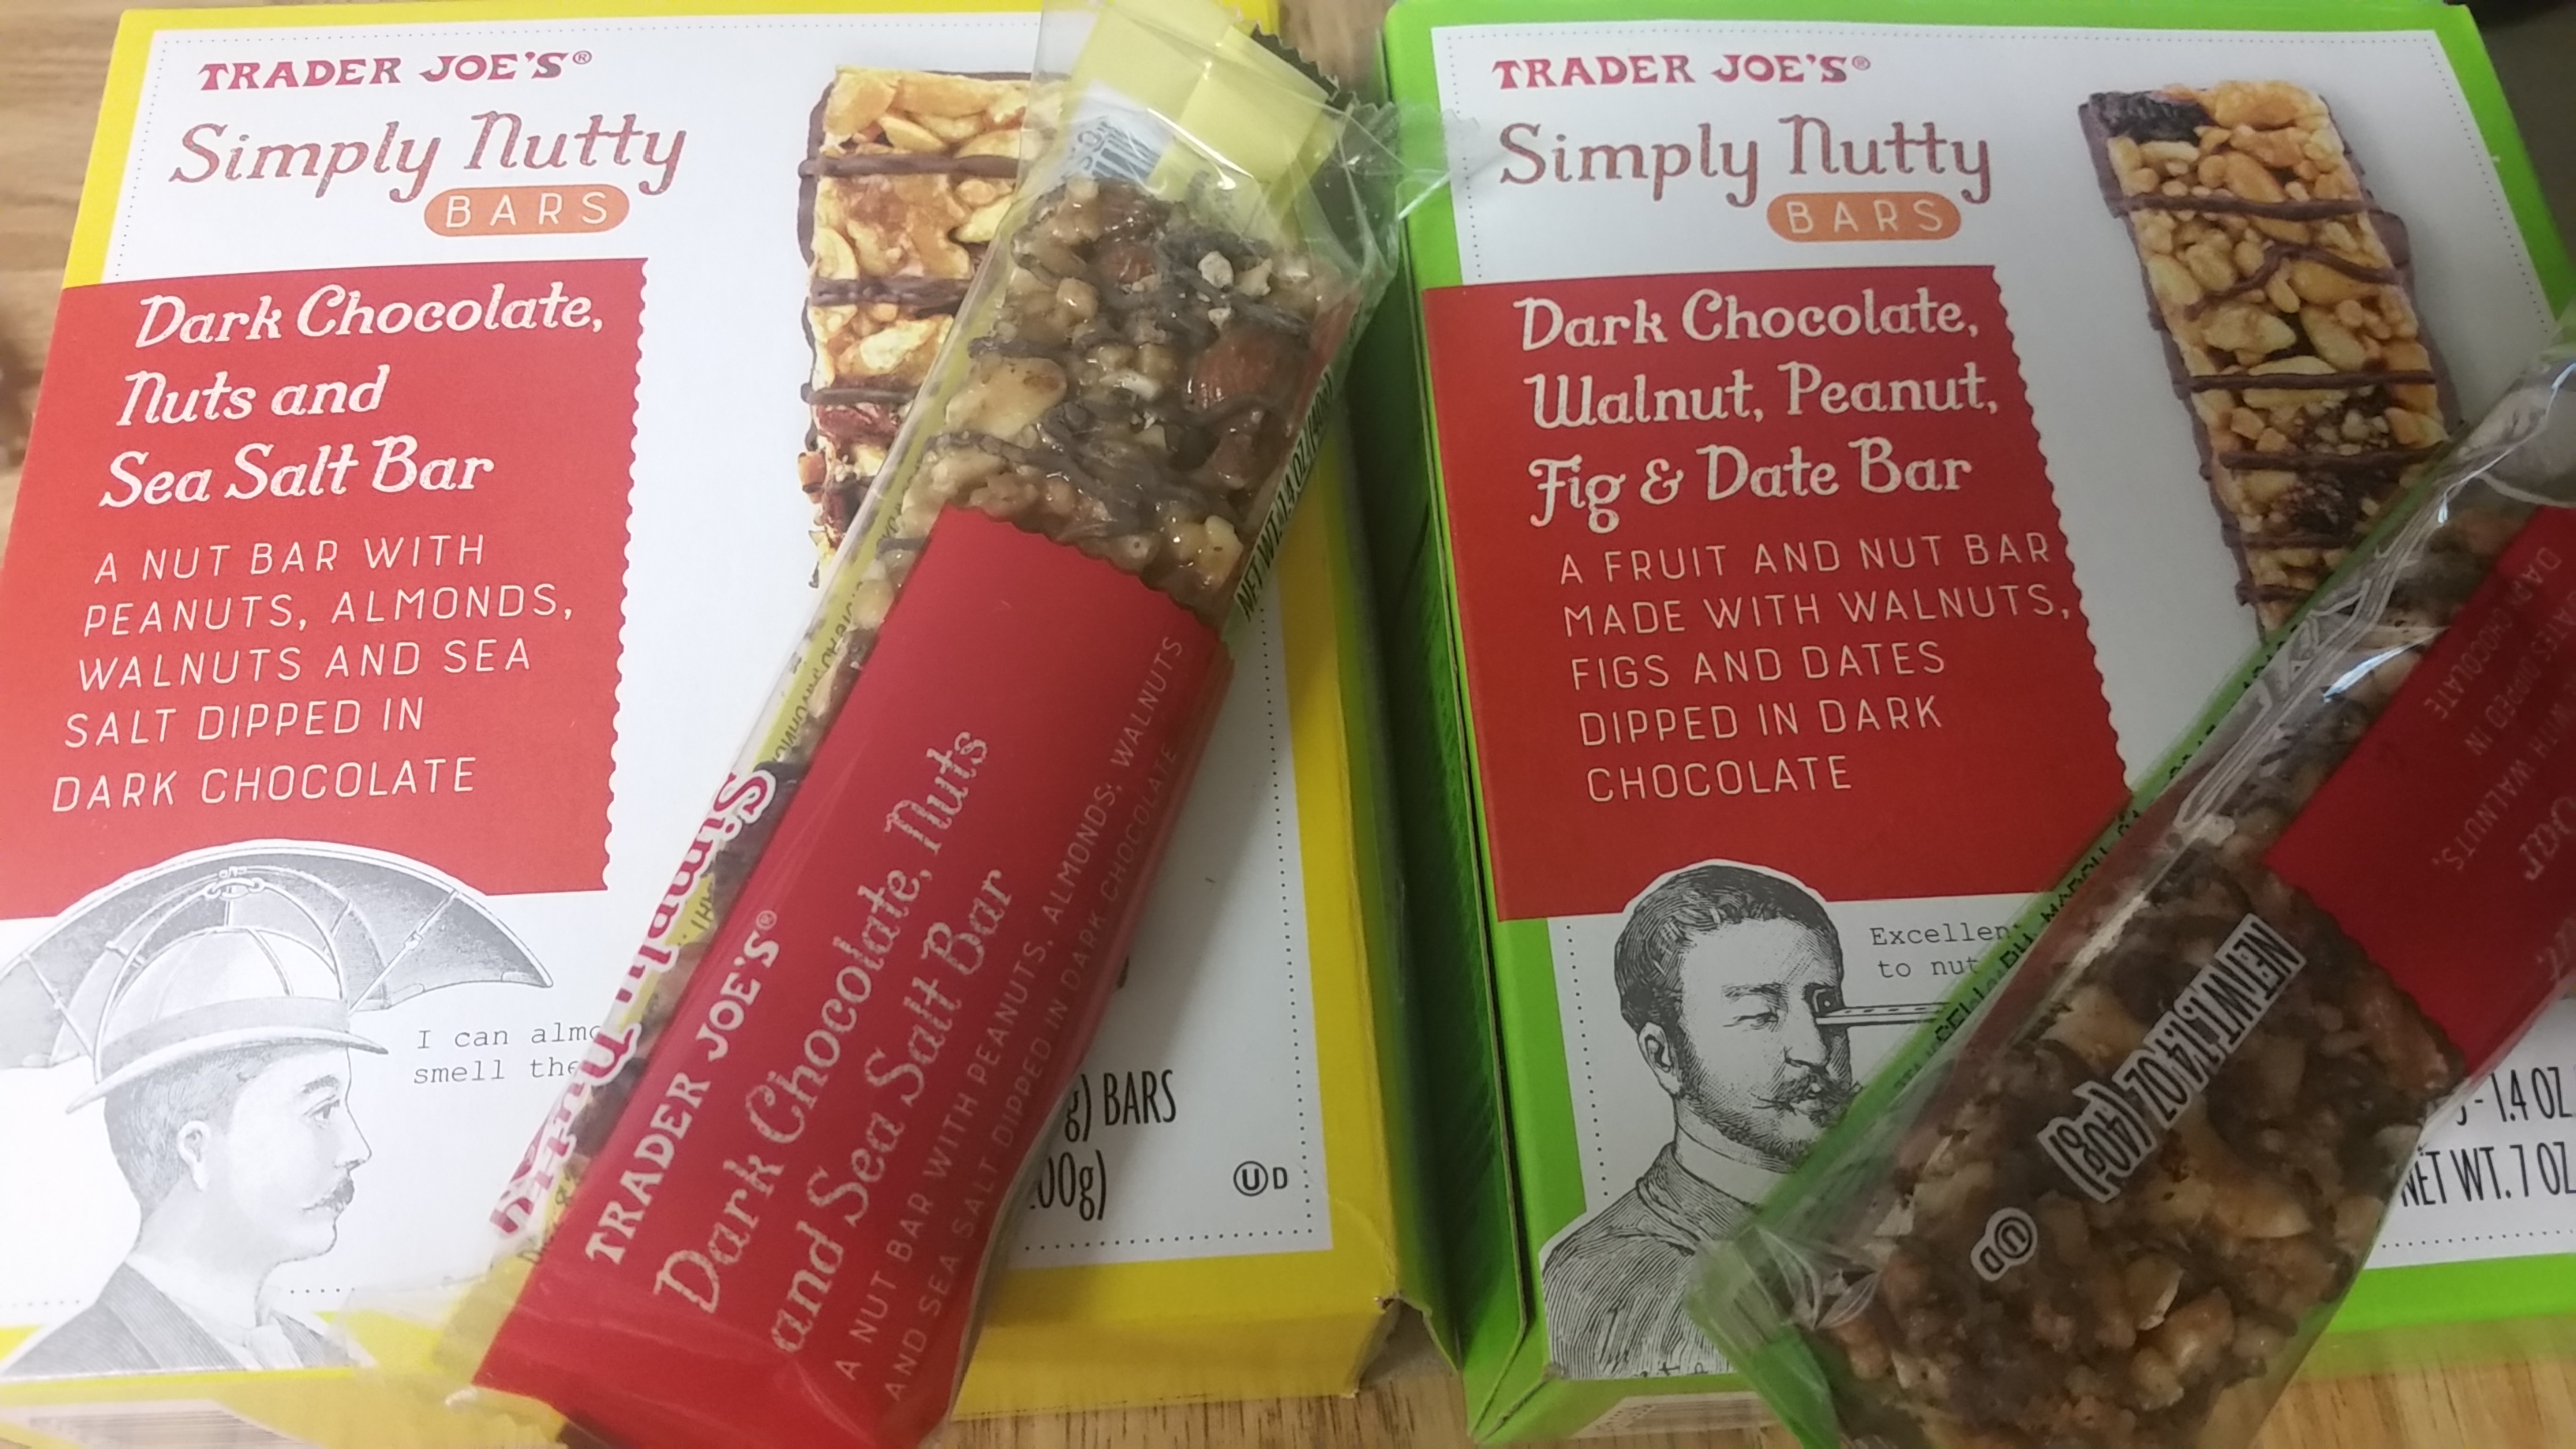 Comparing Trader Joe's Simply Nutty Bars